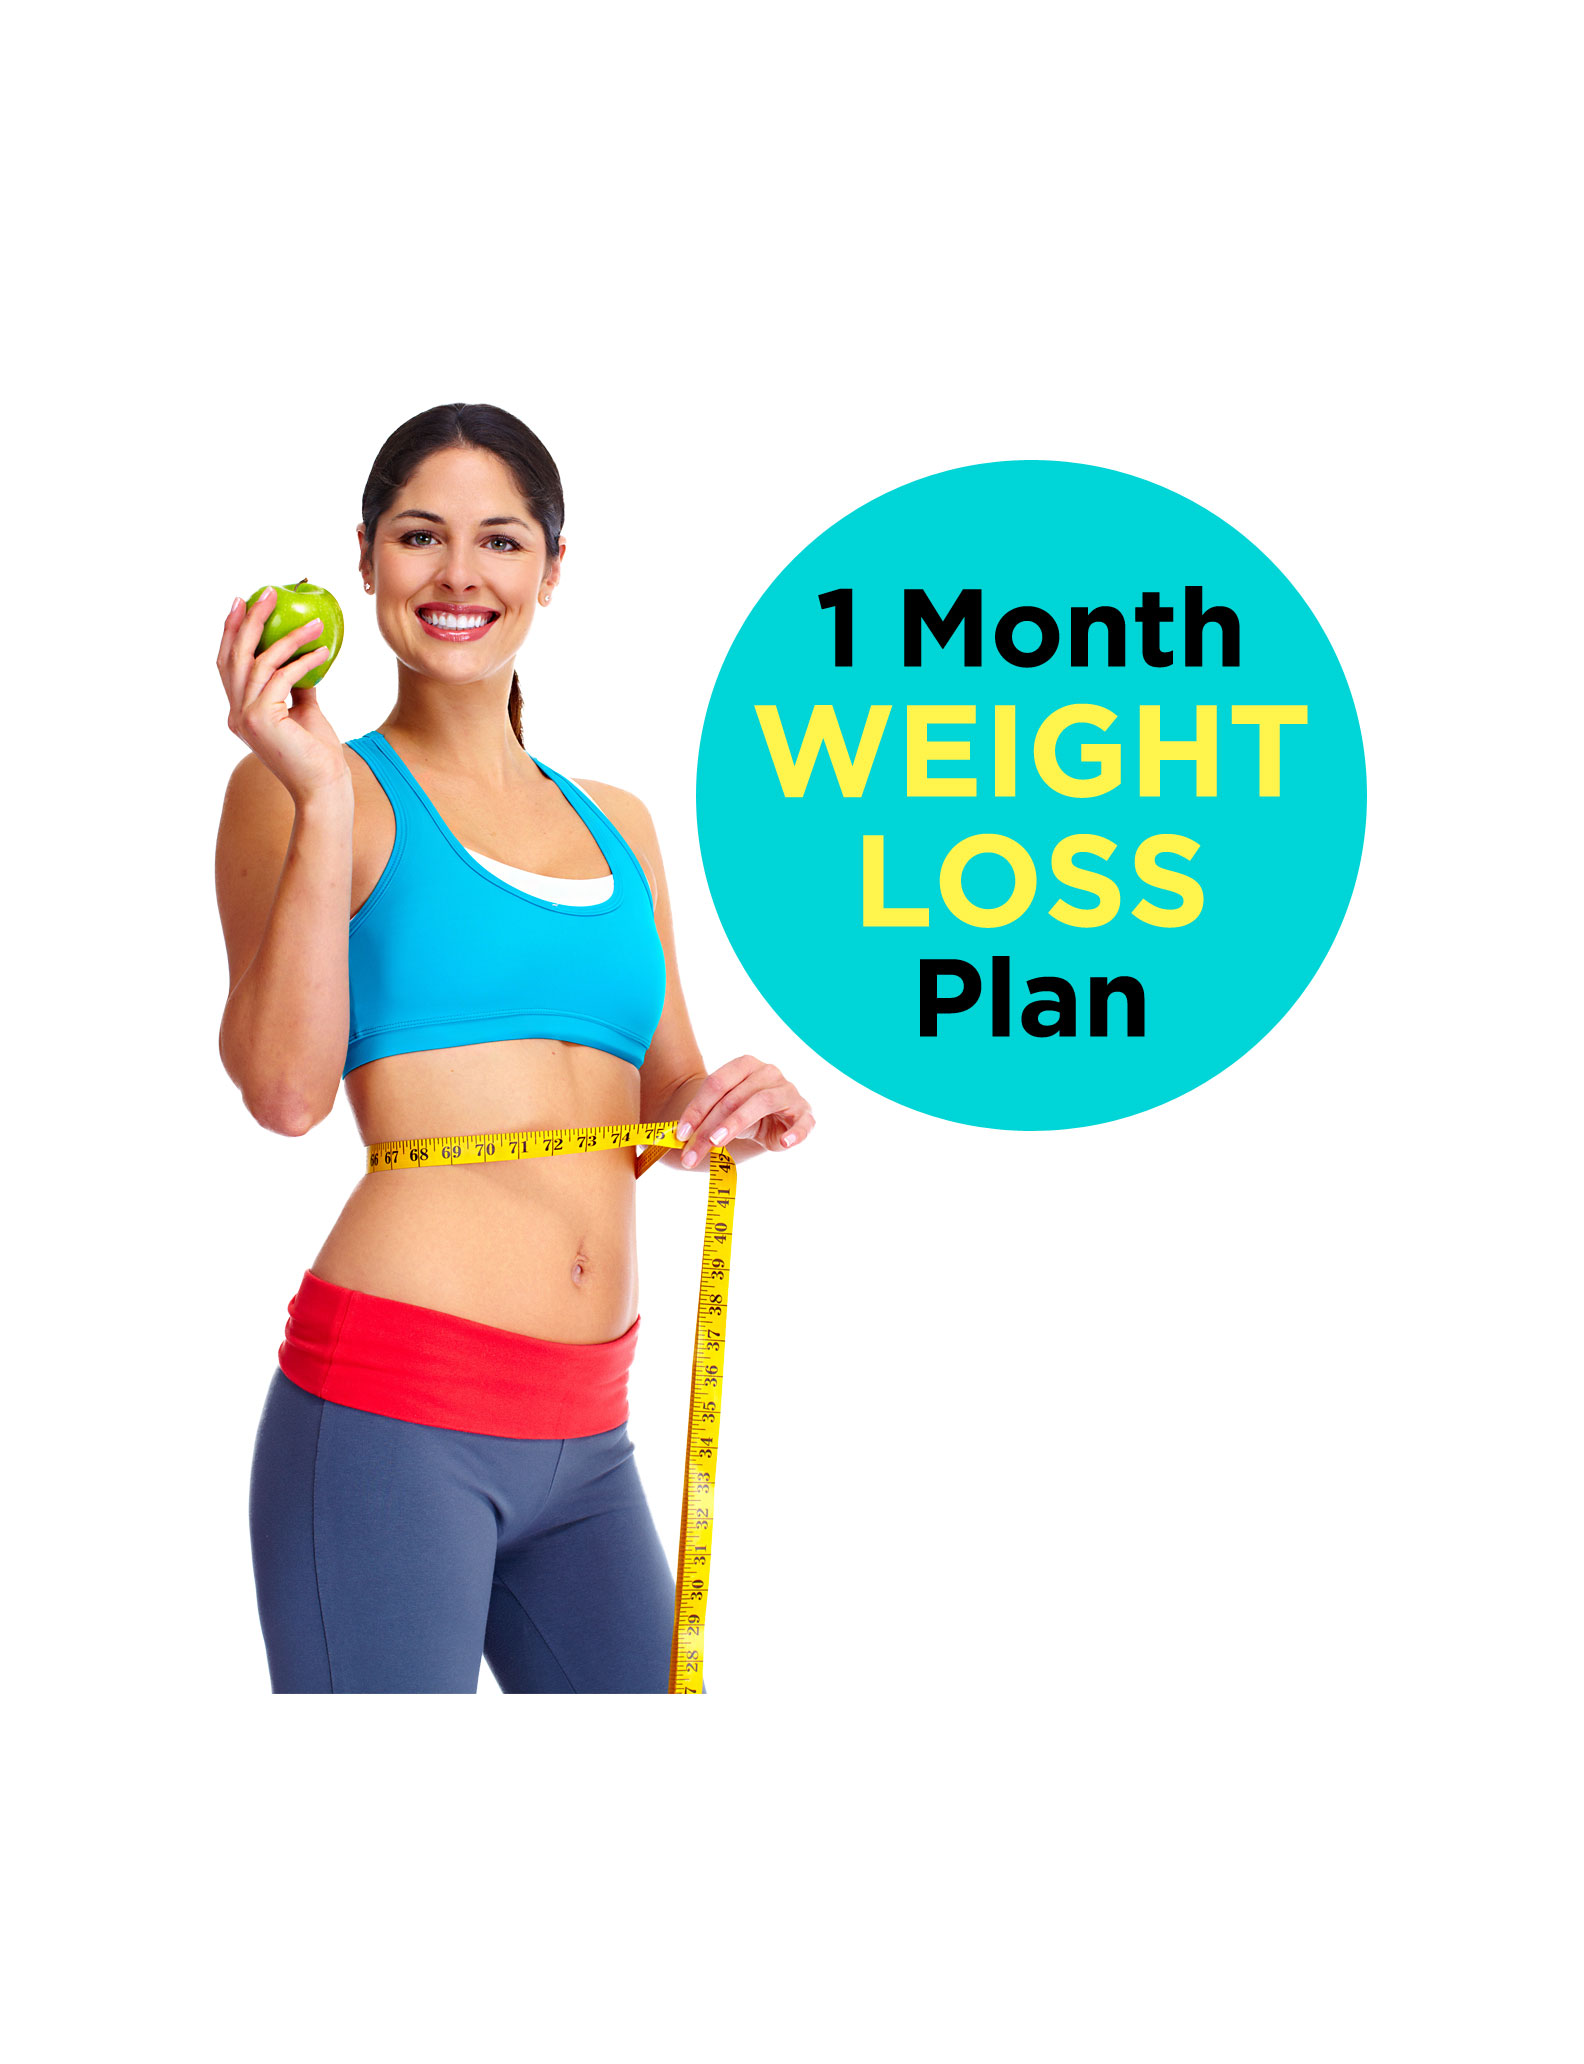 1 month weight loss plan